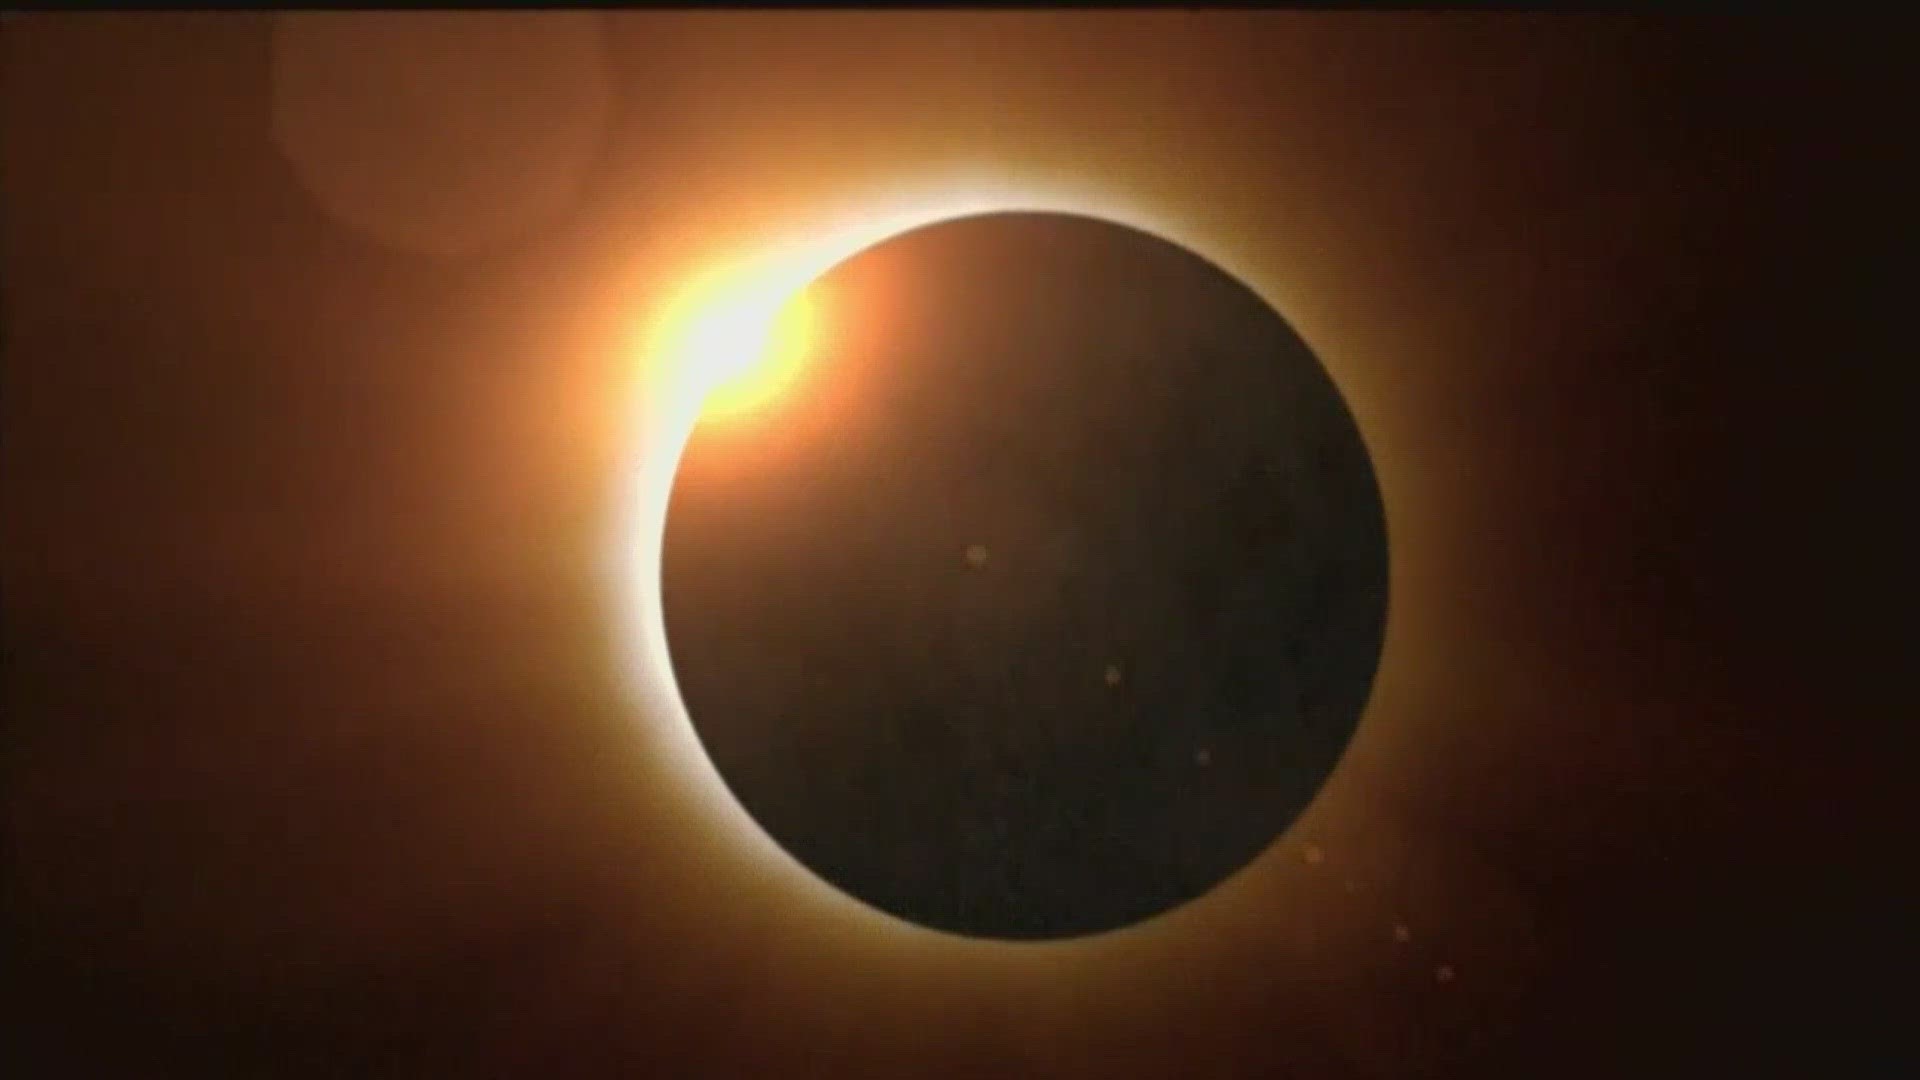 13News talked to an expert at Butler University on how you can get those eclipse pictures with your phone.